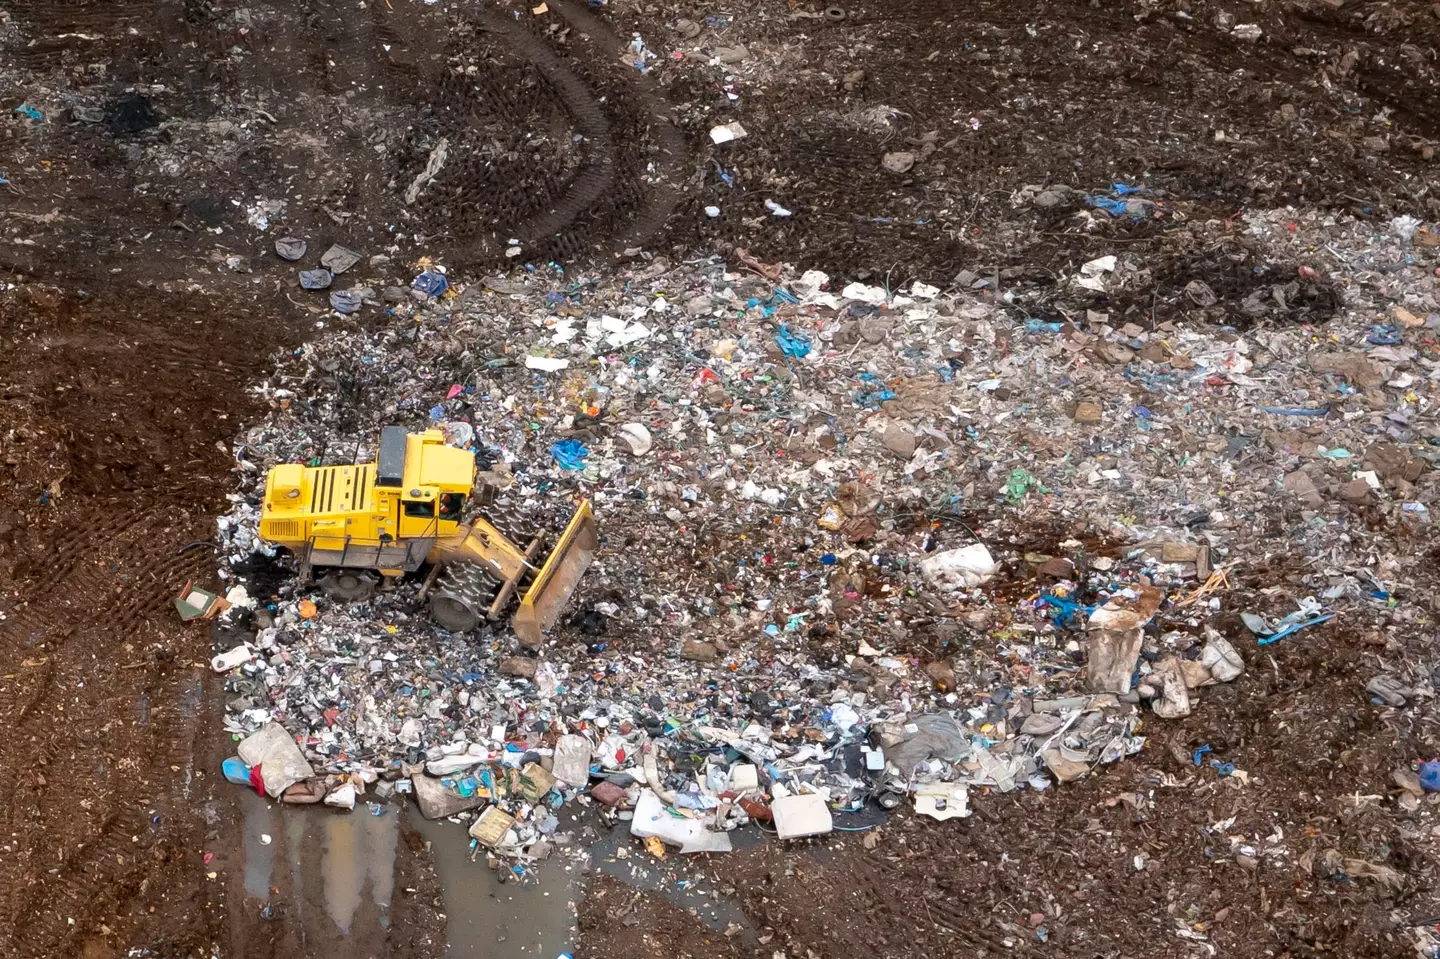 The Newport Council landfill where the hard drive is thought to be.